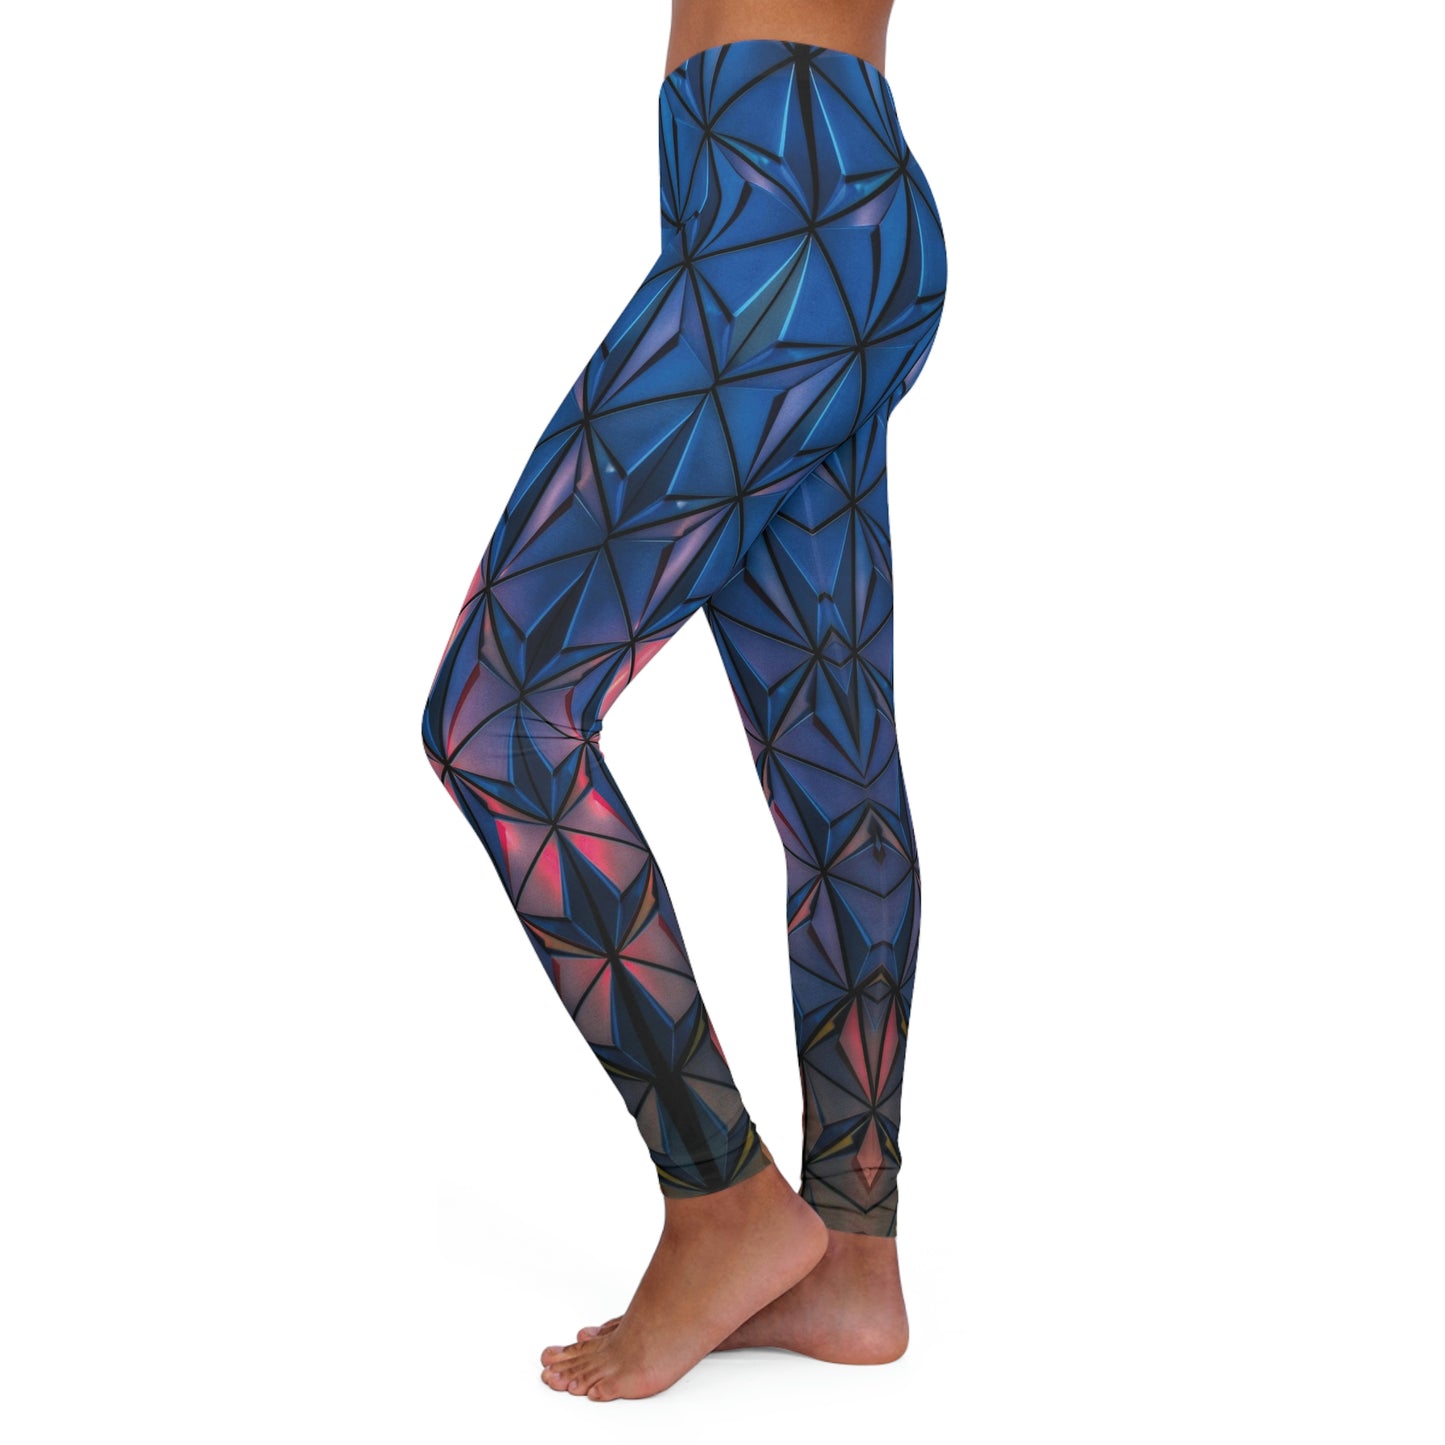 Robot Women's  Leggings Plus Size Leggings One of a Kind Gift - Unique Workout Activewear tights for Mom fitness, Mothers Day, Girlfriend Christmas Gift